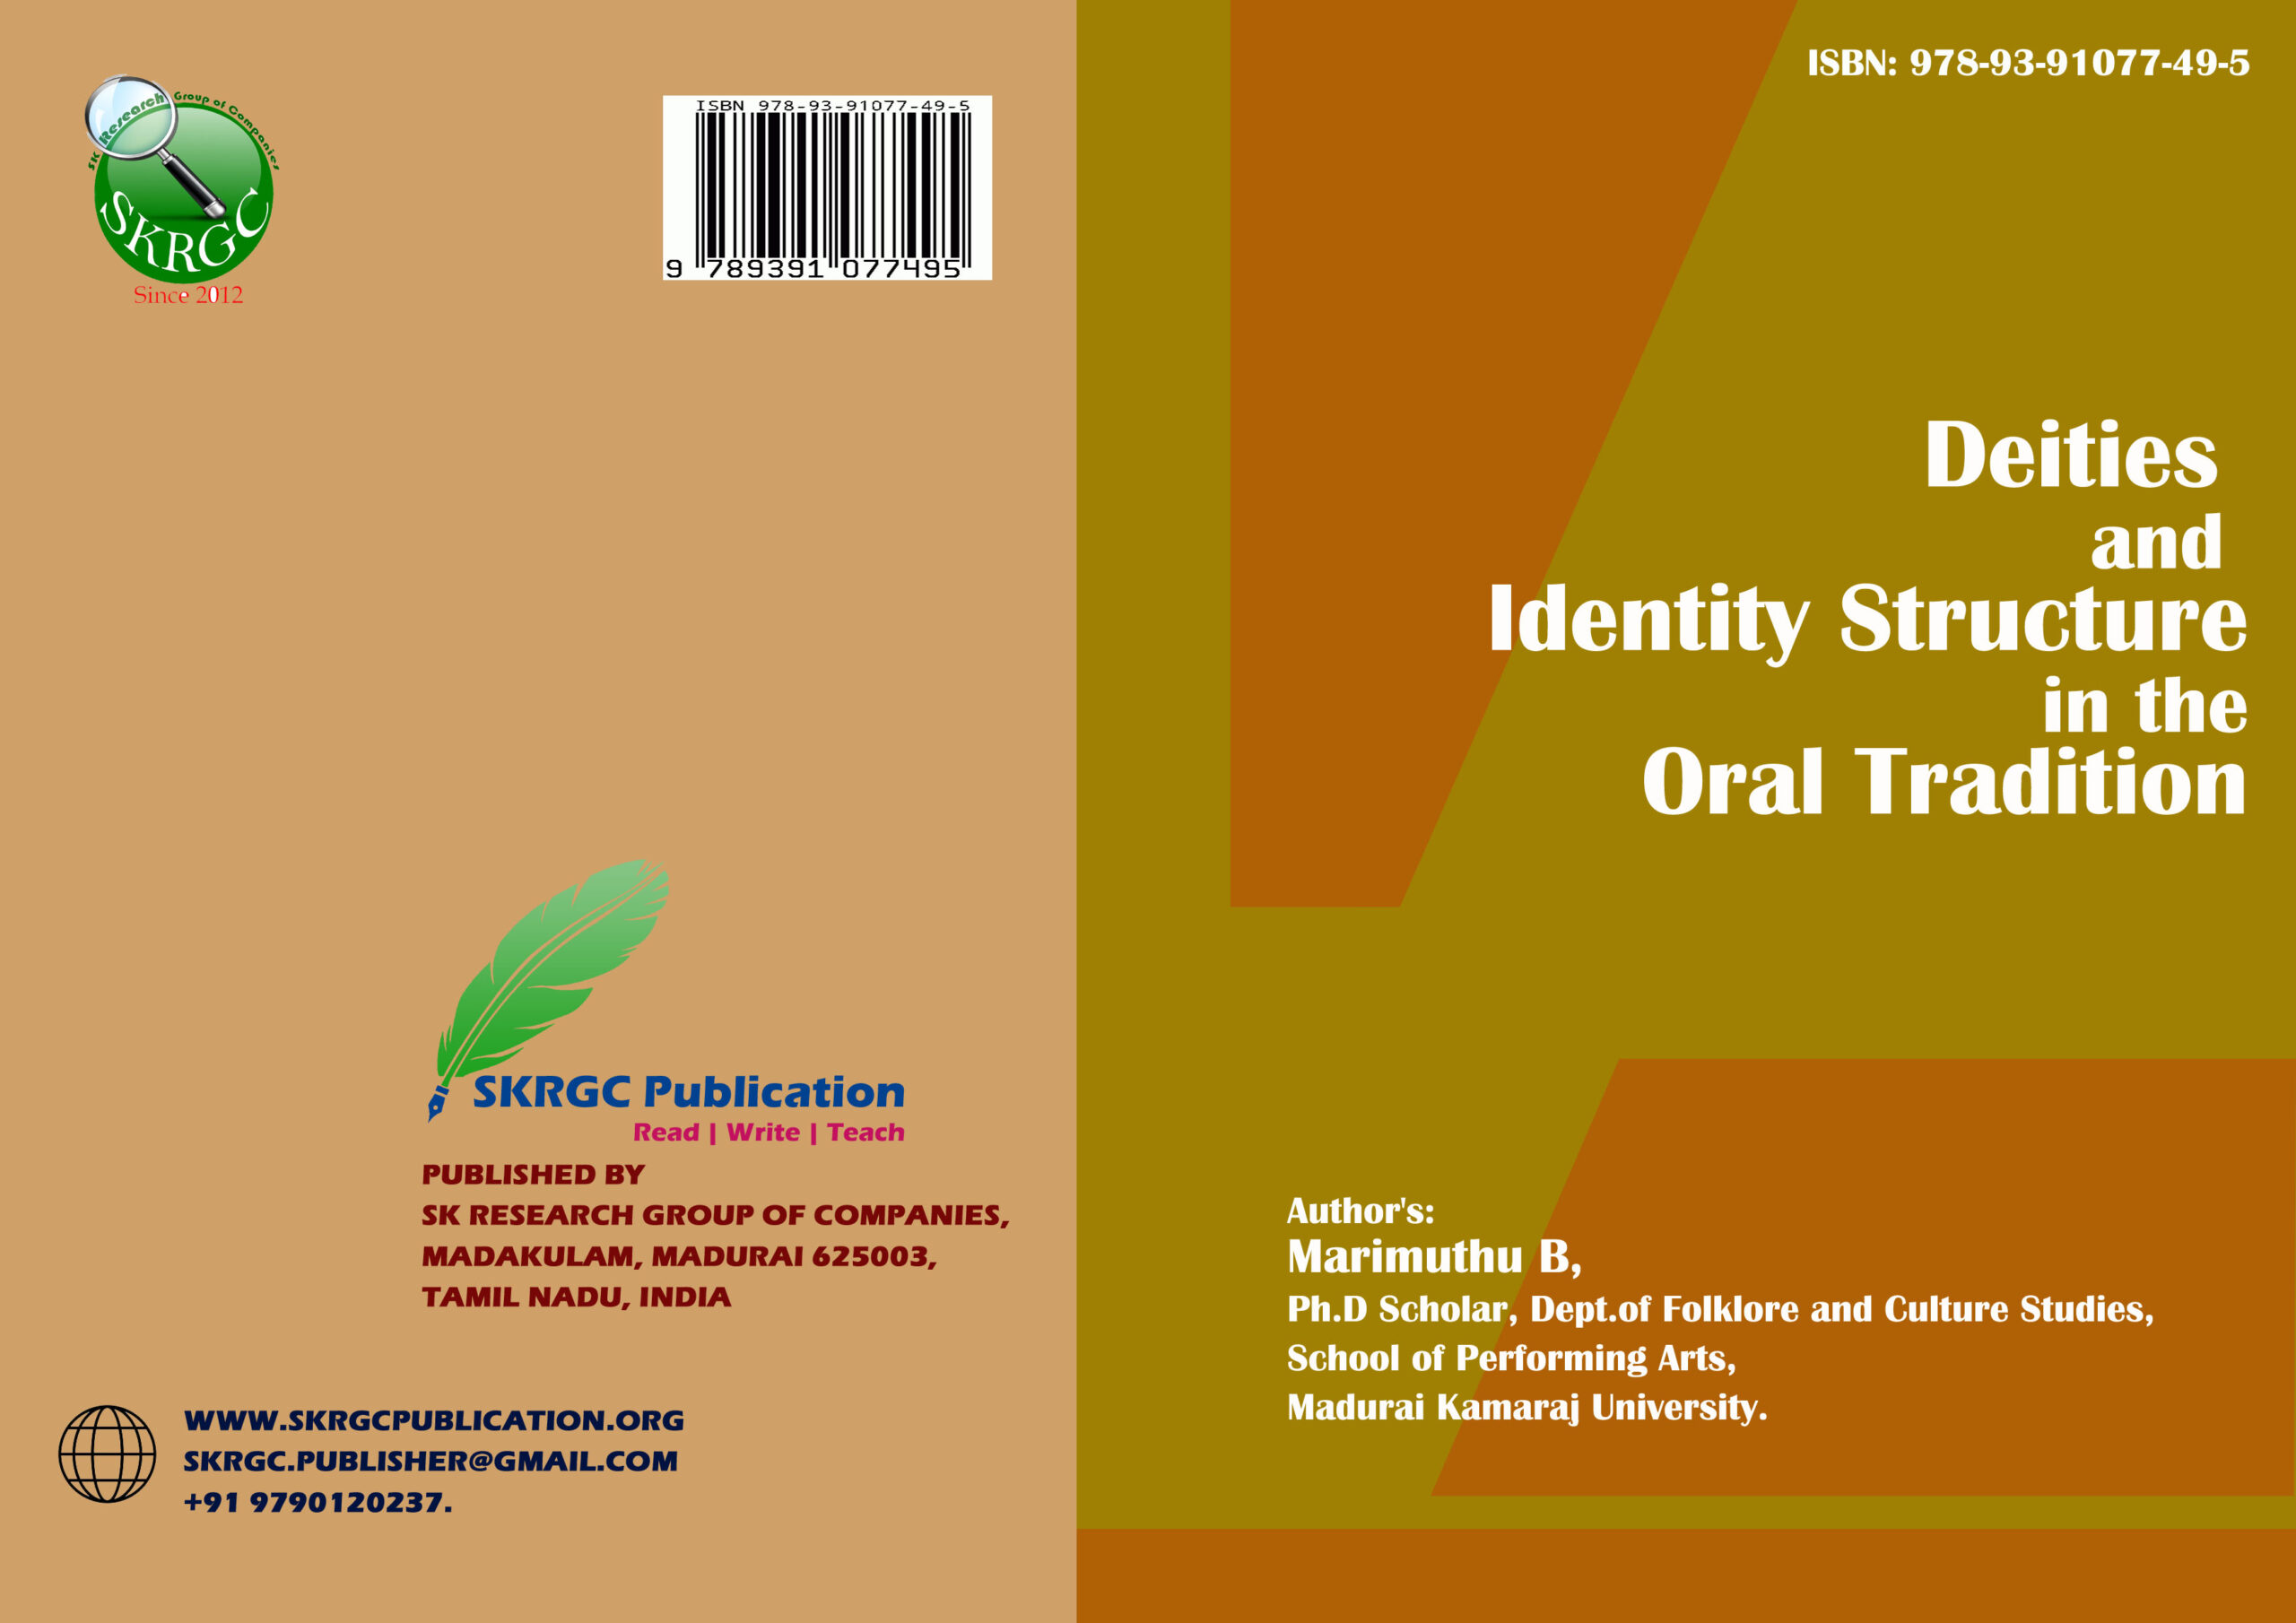 Deities and Identity Structure in the Oral Tradition